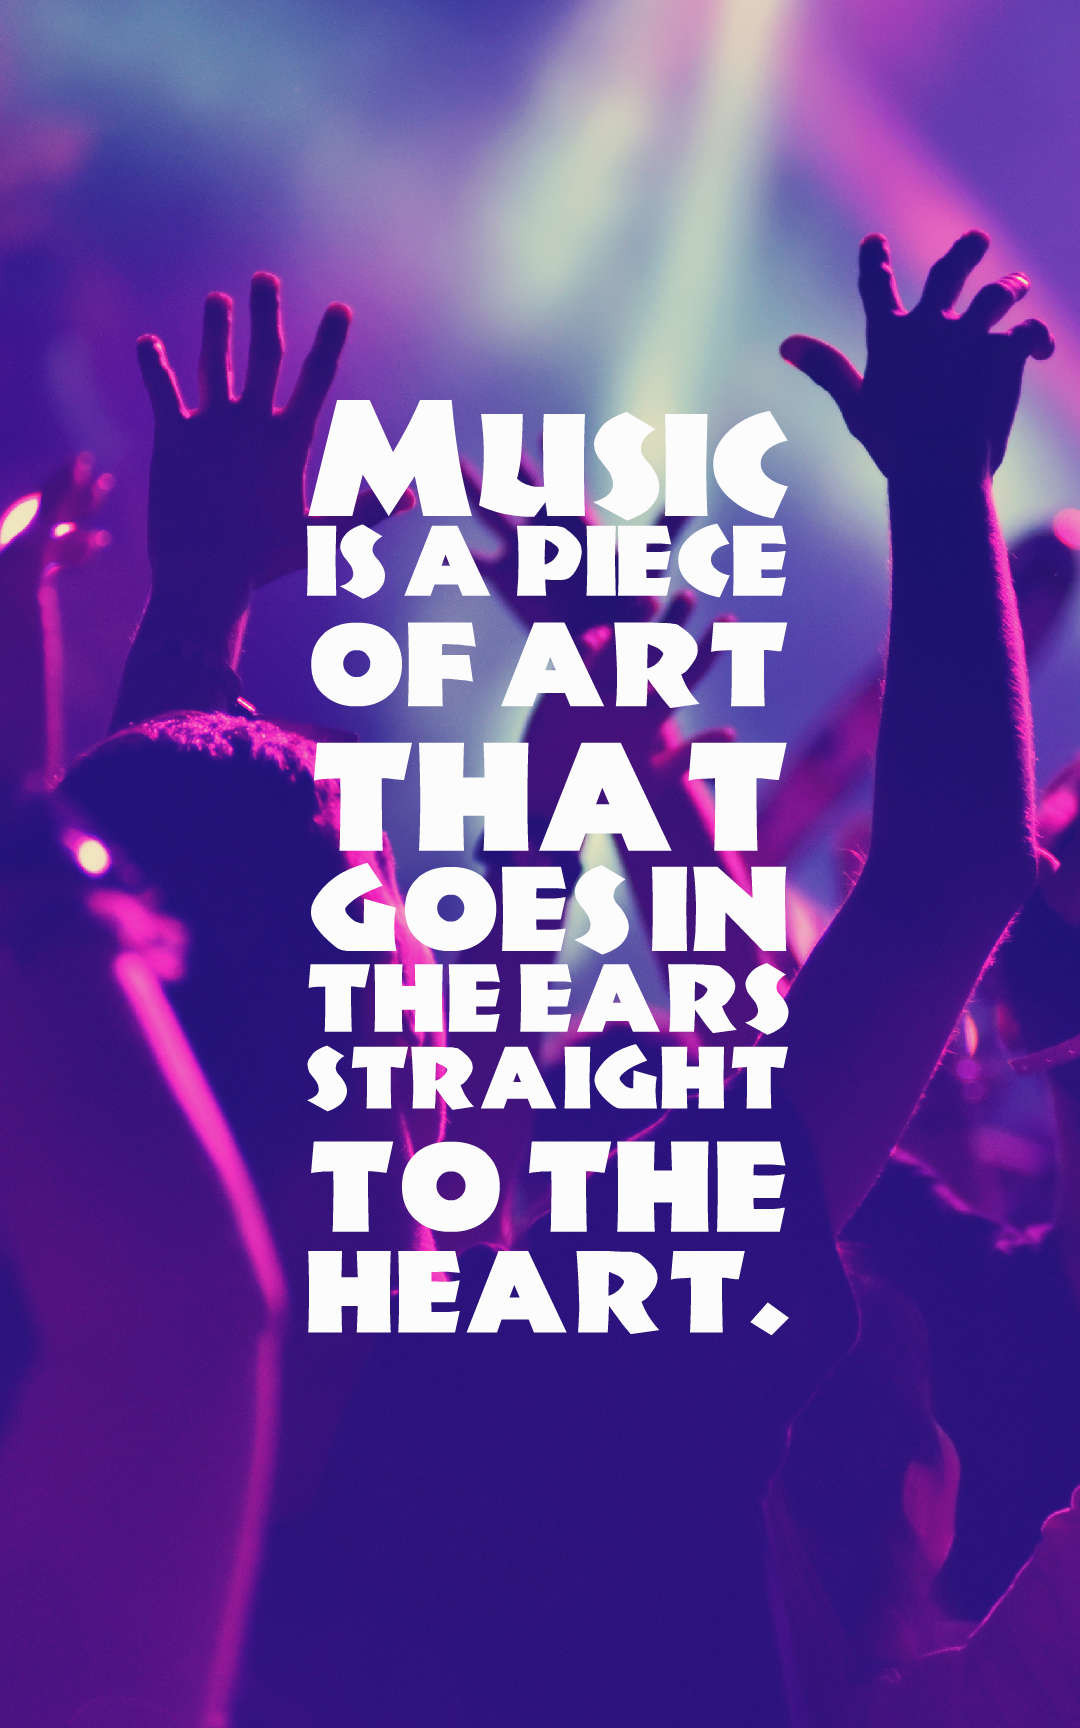 Inspirational Quotes Music
 32 Inspirational Music Quotes And Sayings